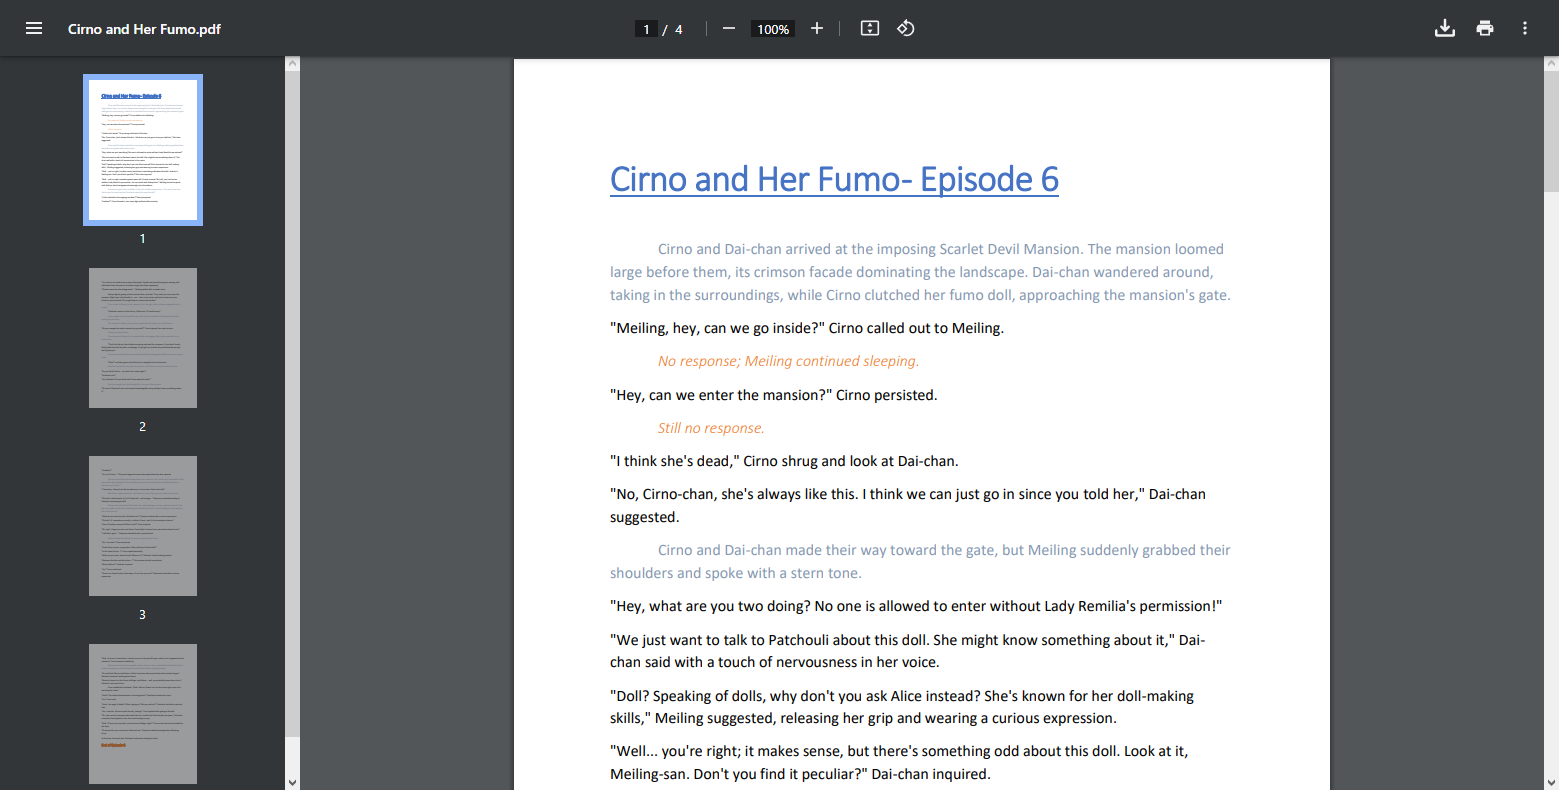 Cirno and her fumo ep 6 script is done! Yay!